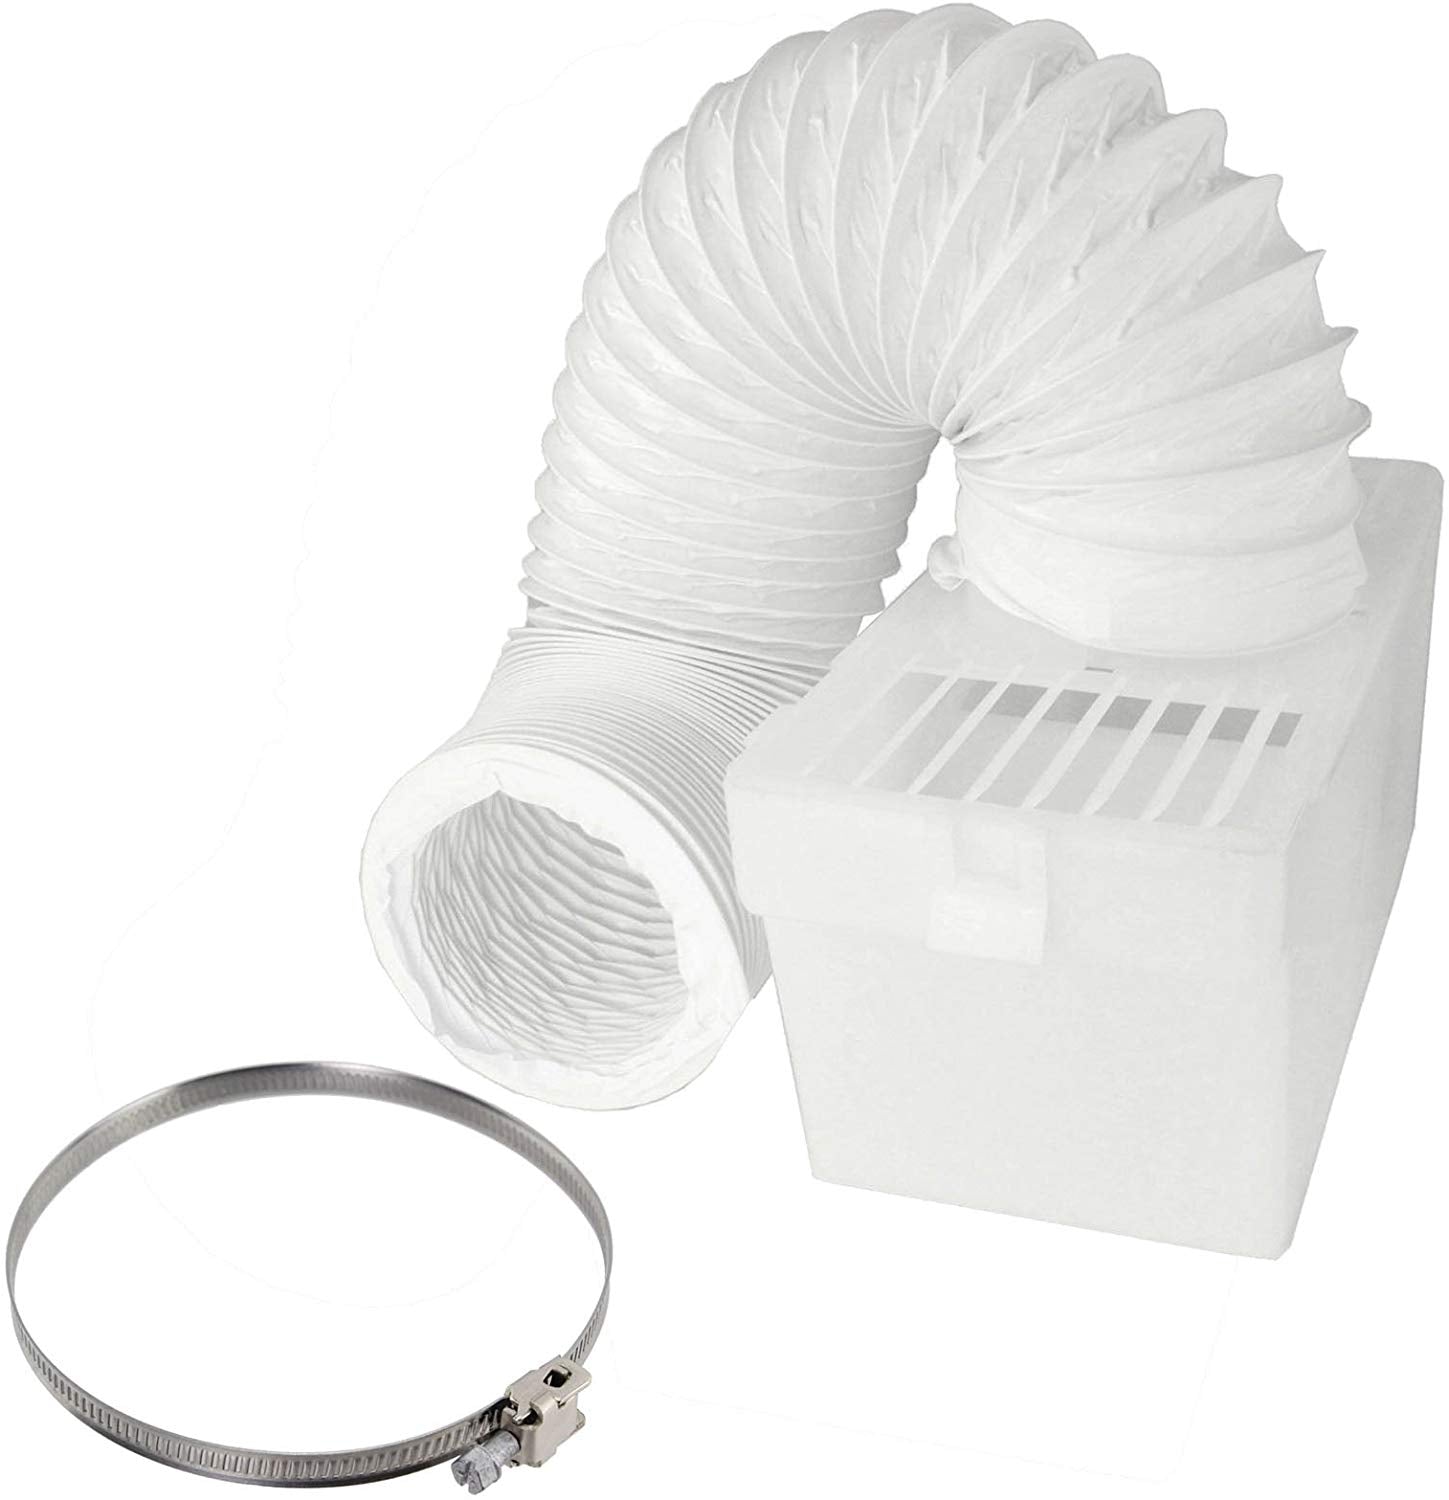 Condenser Vent Box & Hose Kit With Screw Clip for Miele Vented Tumble Dryer (4" / 100mm Diameter)